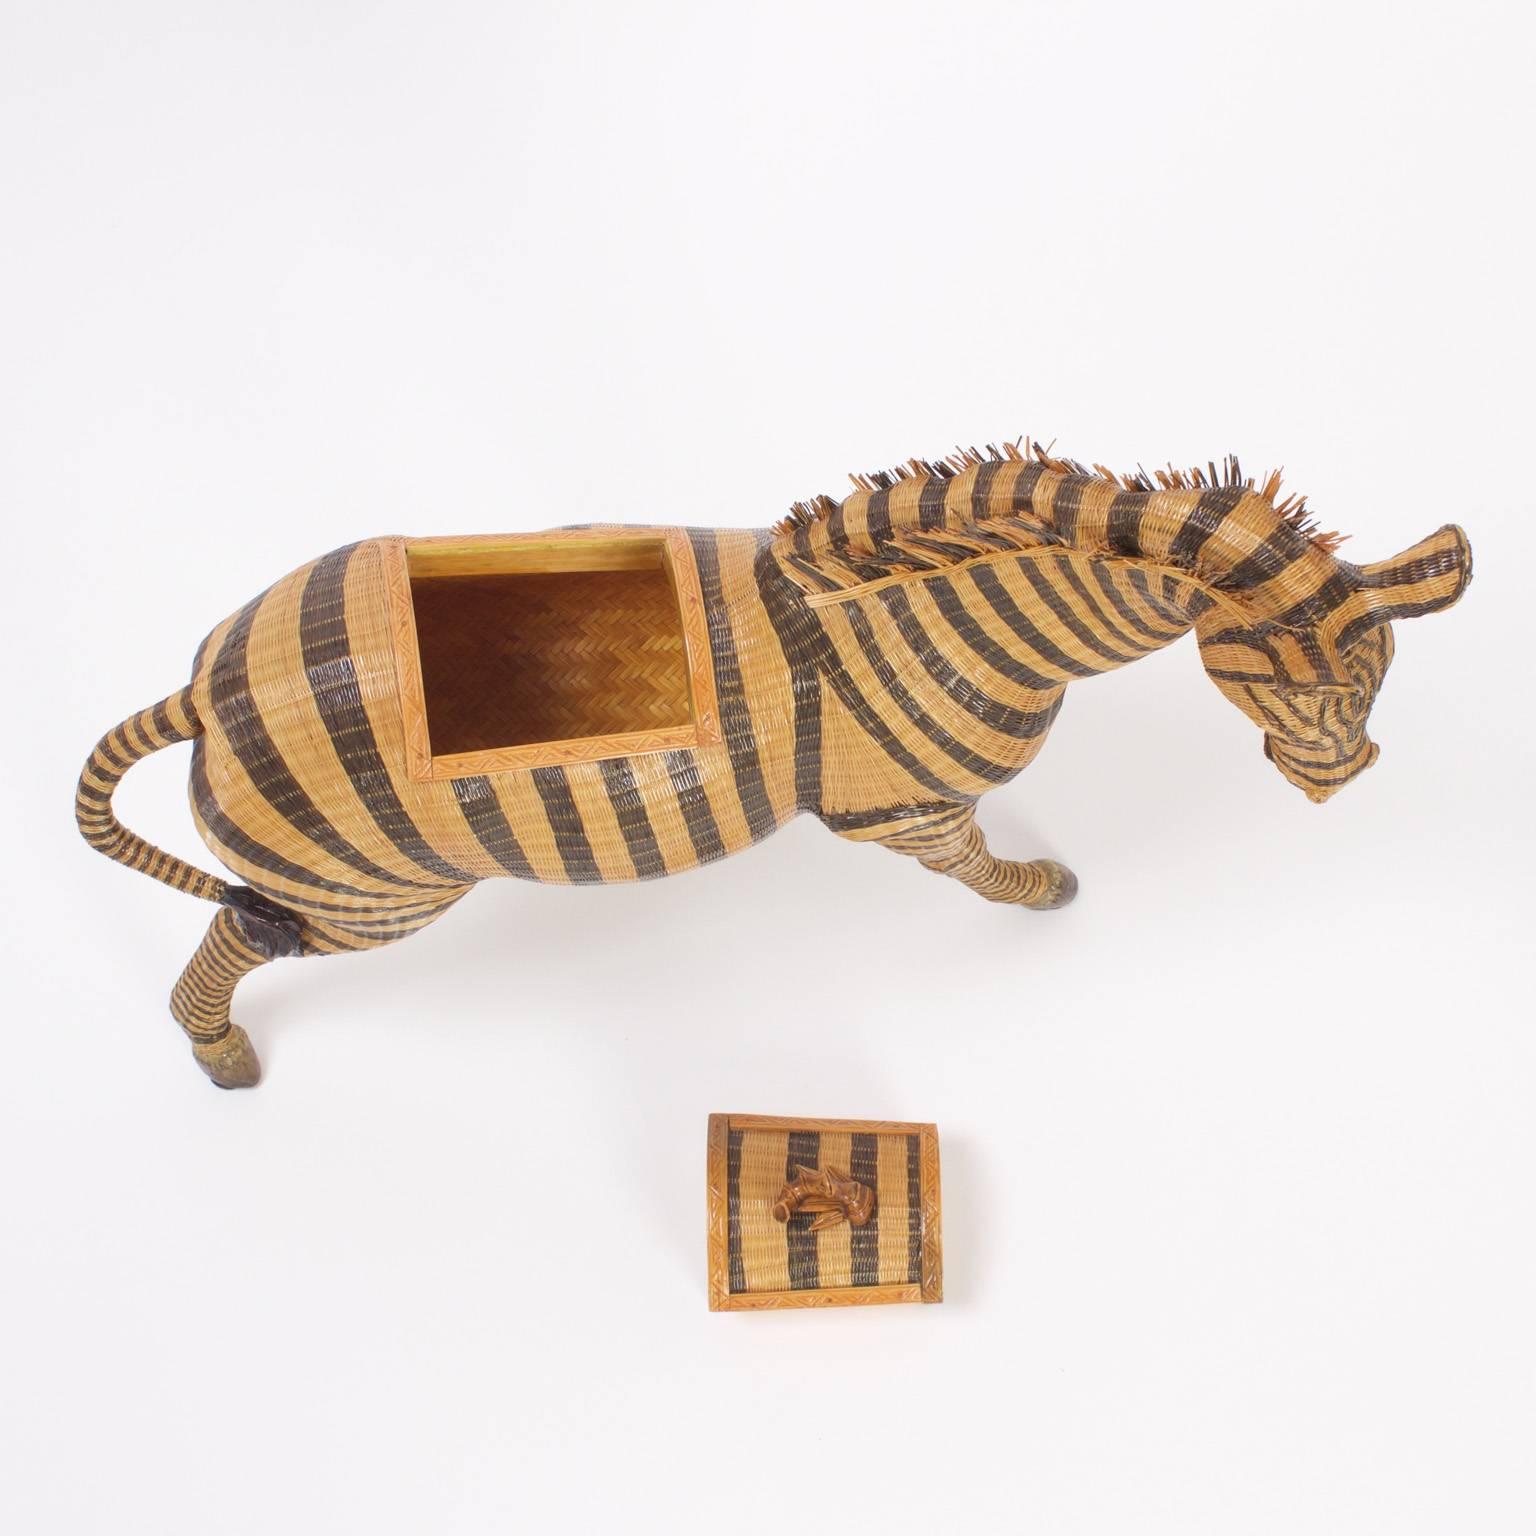 Charming wicker zebra with an intricate woven construction and life like posture. This zebra functions as a basket or box, having a latch on the back with faux a bamboo handle that open to reveal storage compartments. A similar one is available